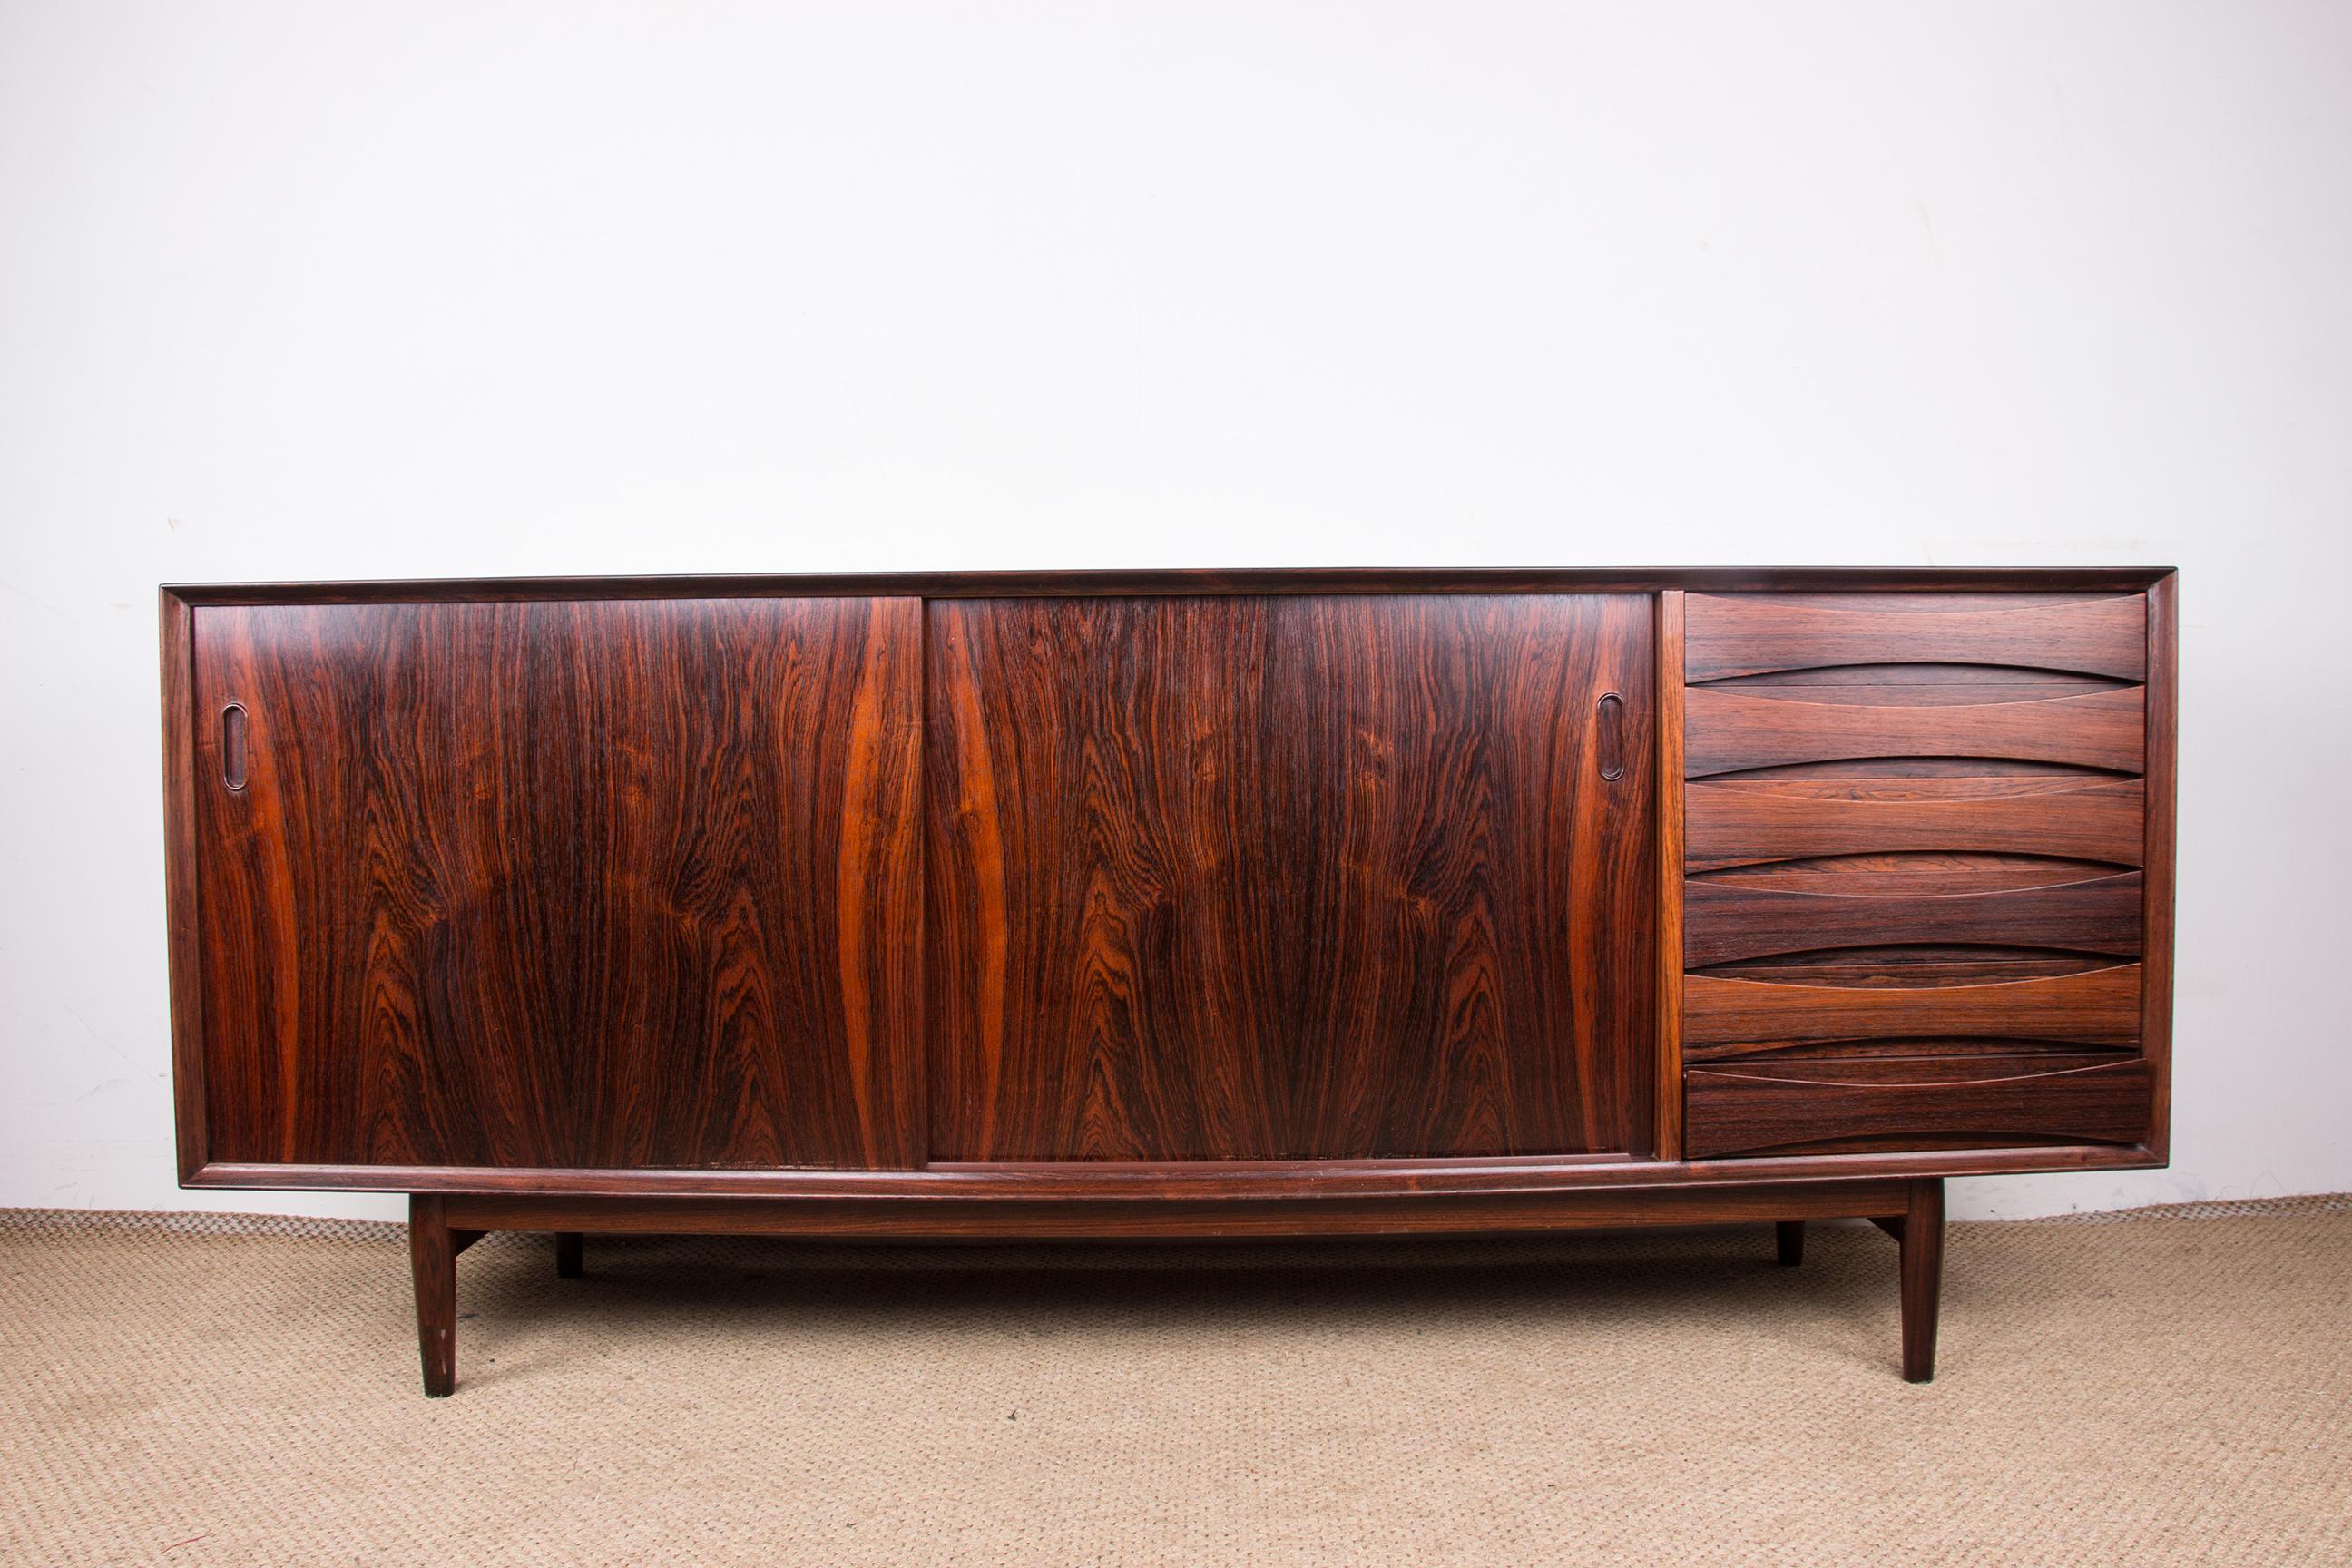 Superb Scandinavian sideboard. 
The 2 sliding doors on the left are reversible, either in rosewood or in pastel colors. 
6 drawers on the right side. 
The rosewood is dark and gives this piece of furniture a rare elegance. 
This is an iconic model